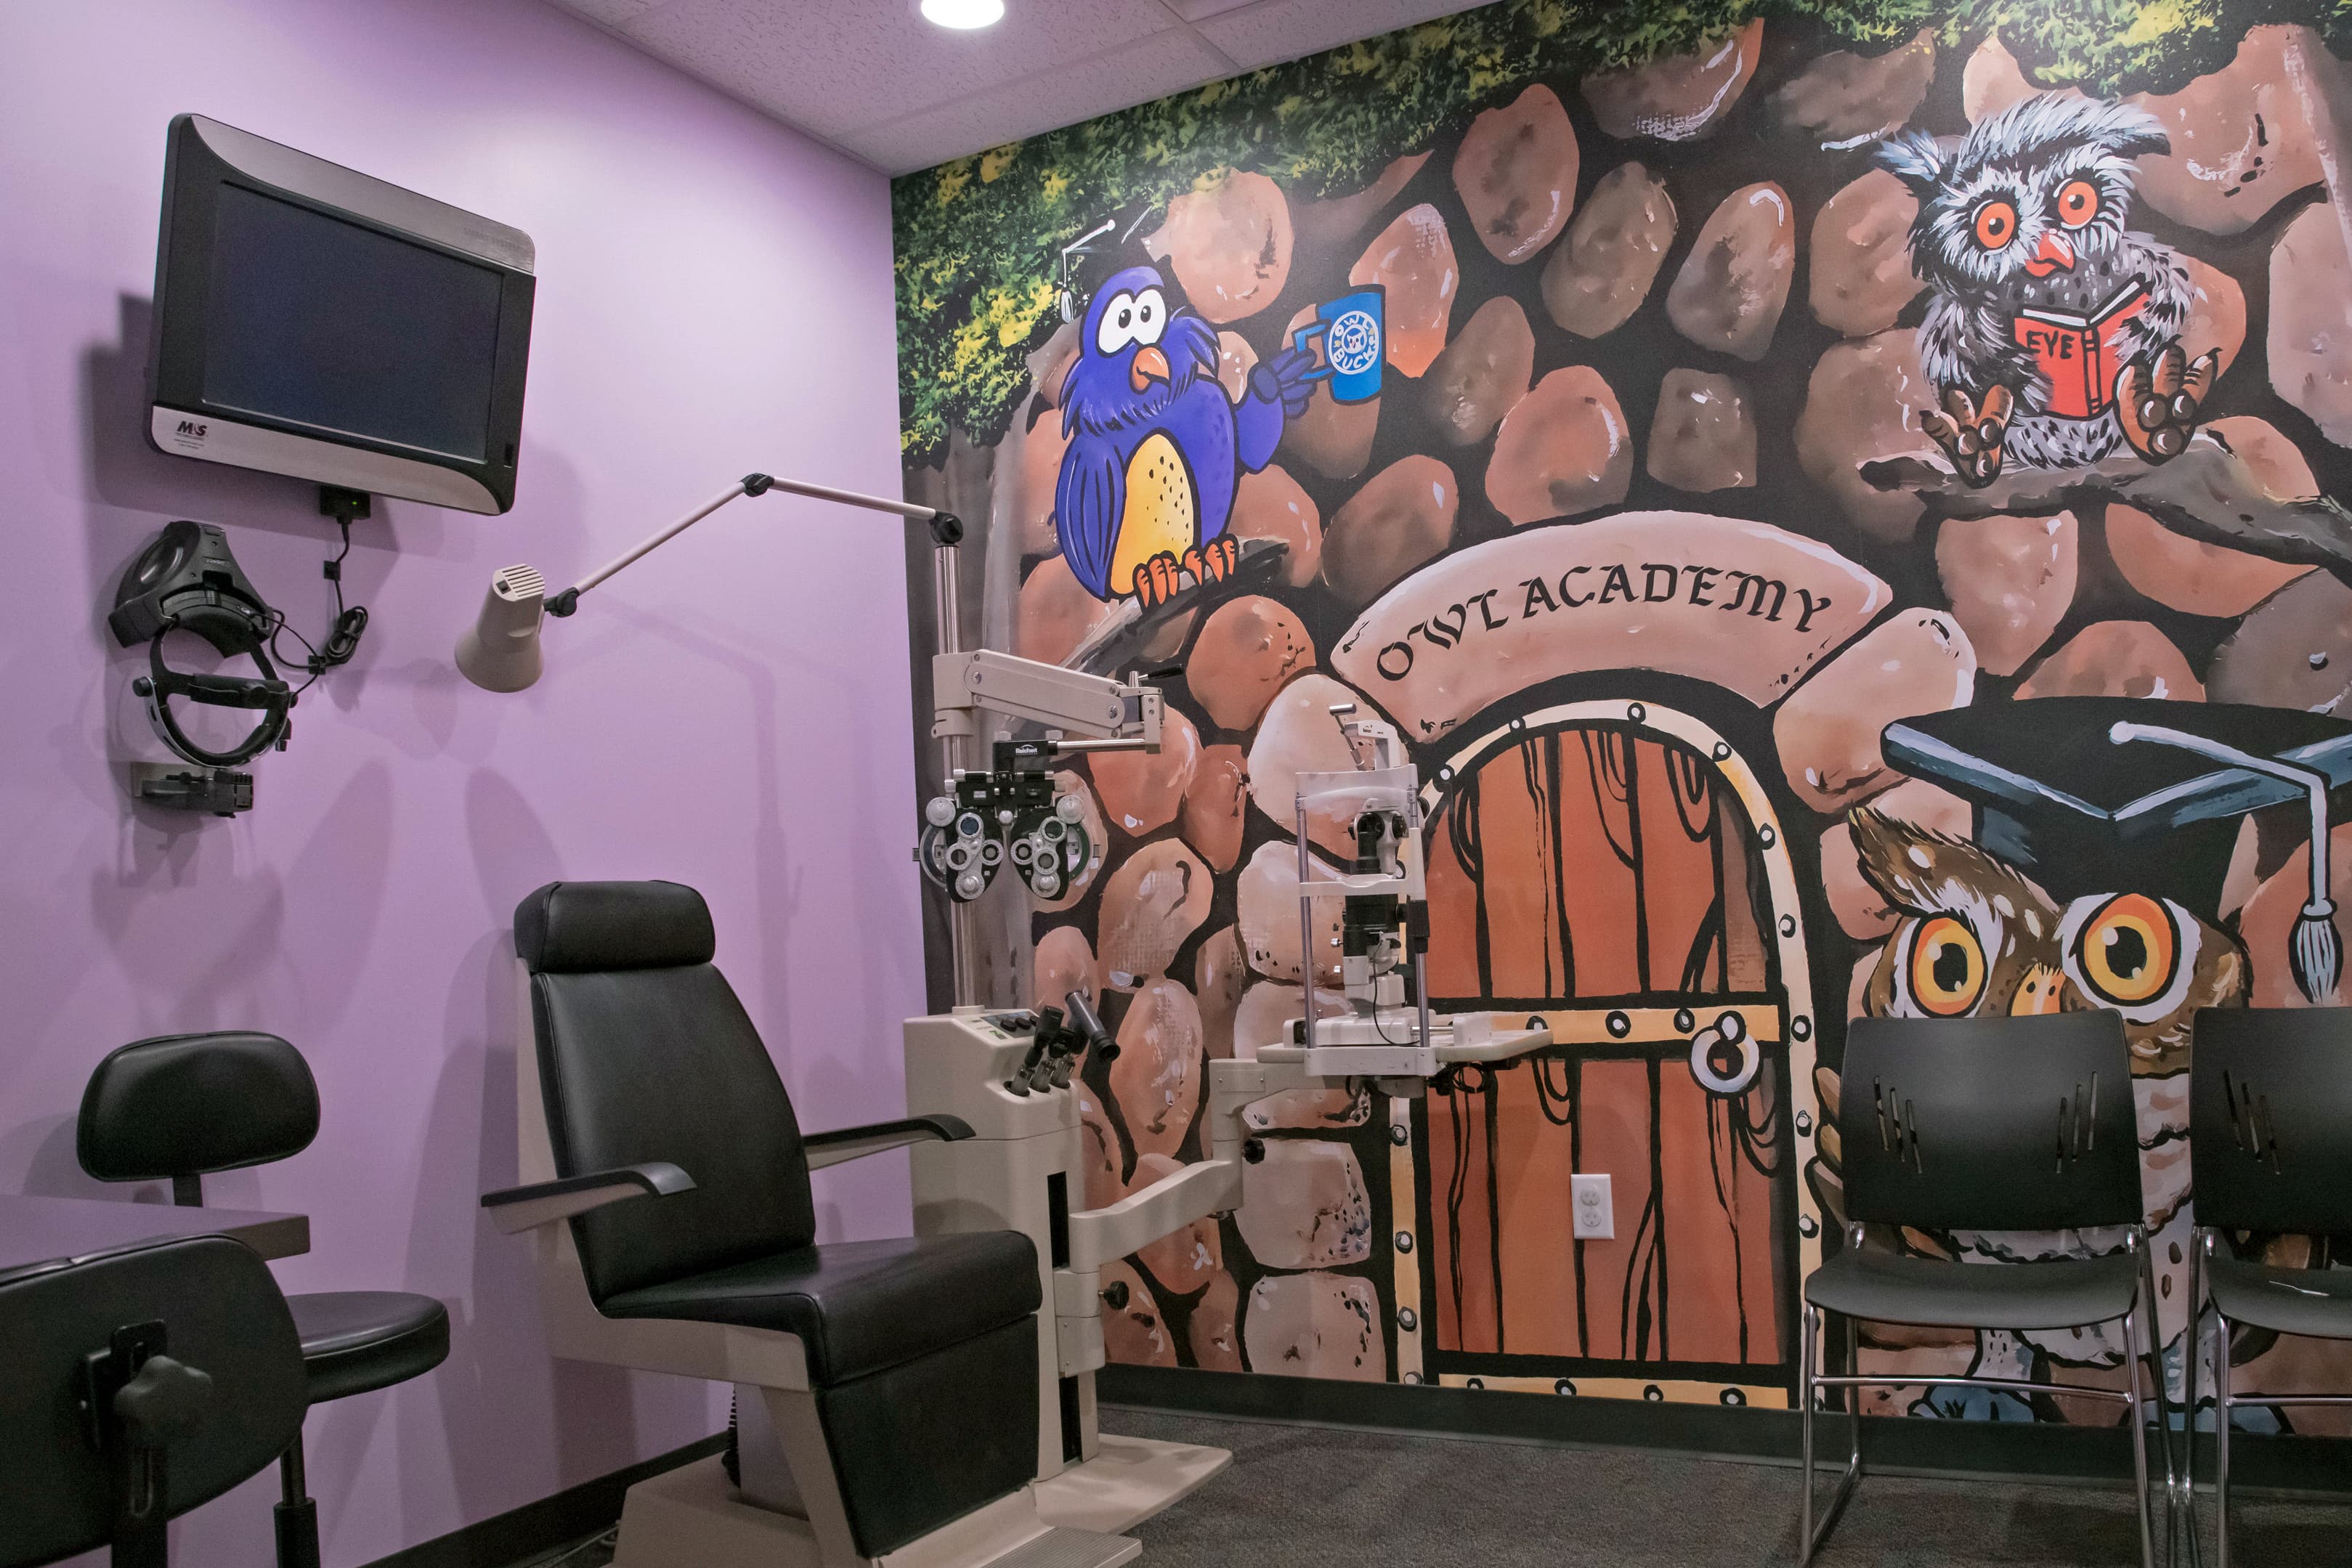 vision eye exam room with a large mural on the wall